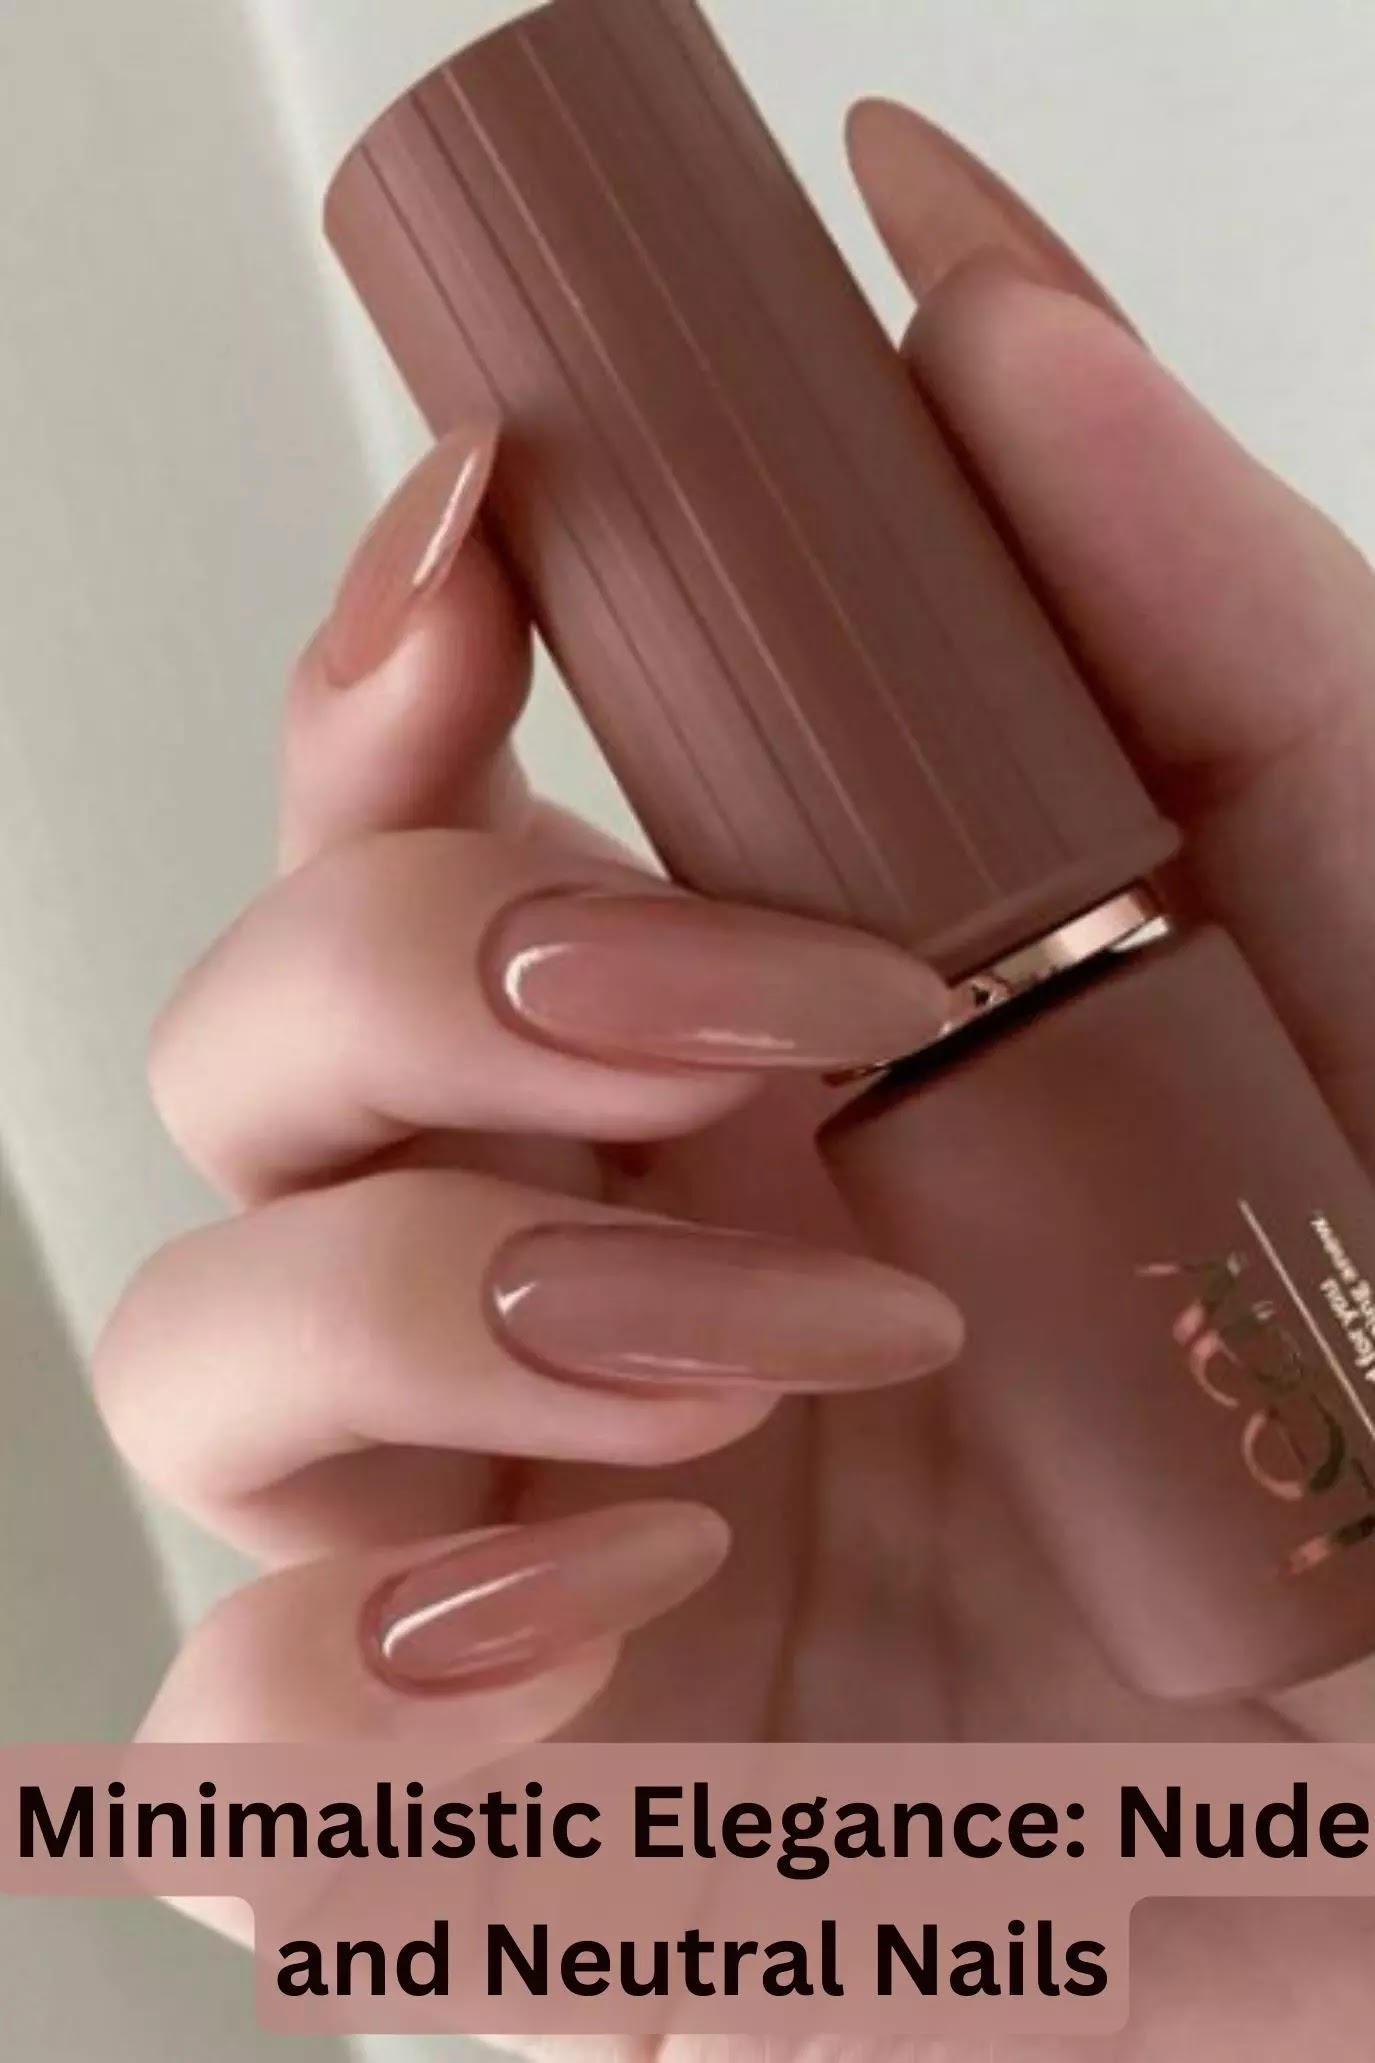 Minimalistic Elegance: Nude and Neutral Nails